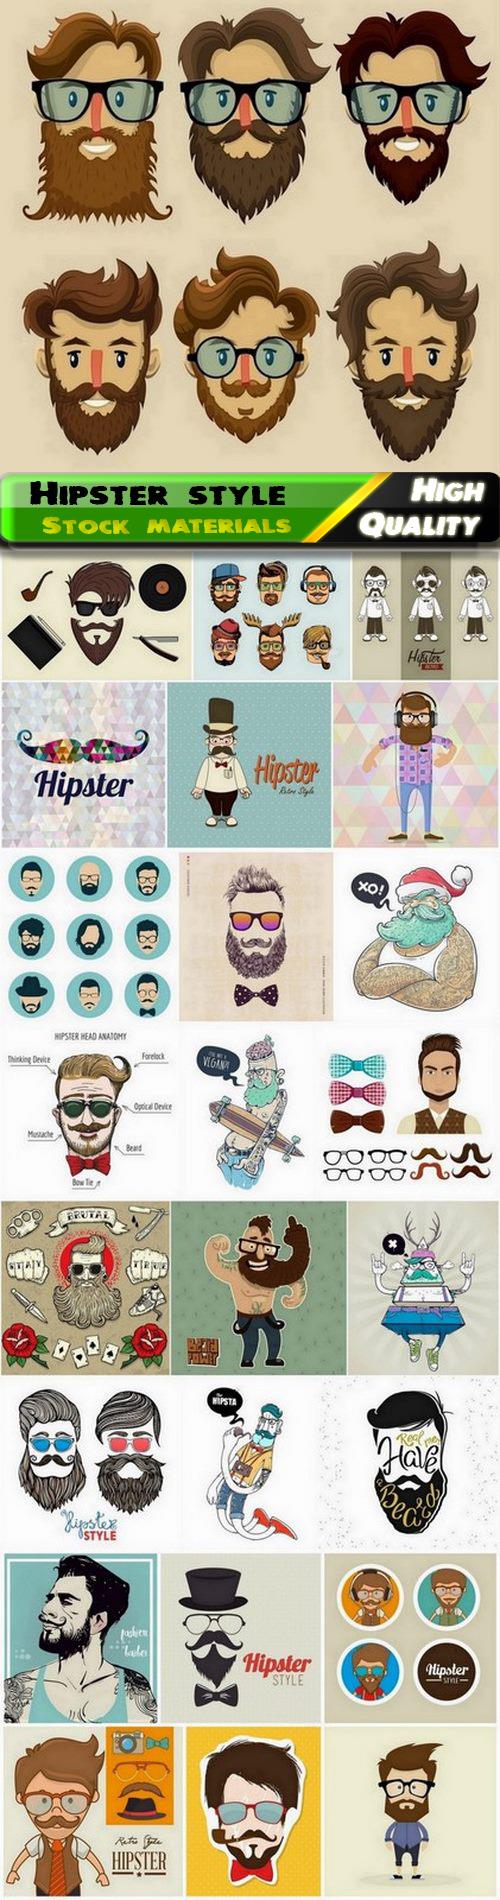 Stylish people and man in hipster style - 25 Eps